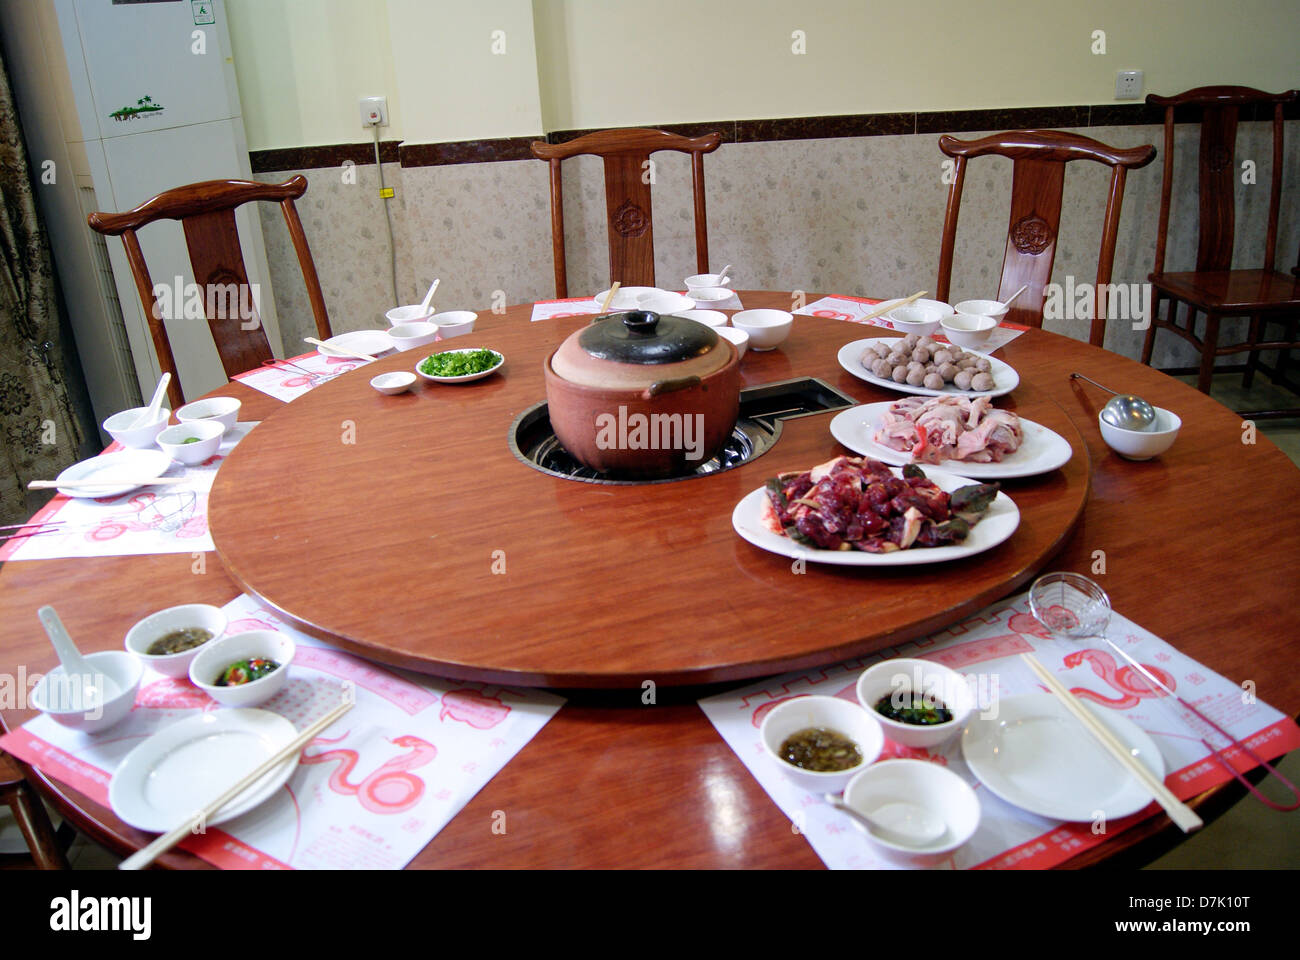 Dining table and food material for Chinese Restaurant Stock Photo - Alamy